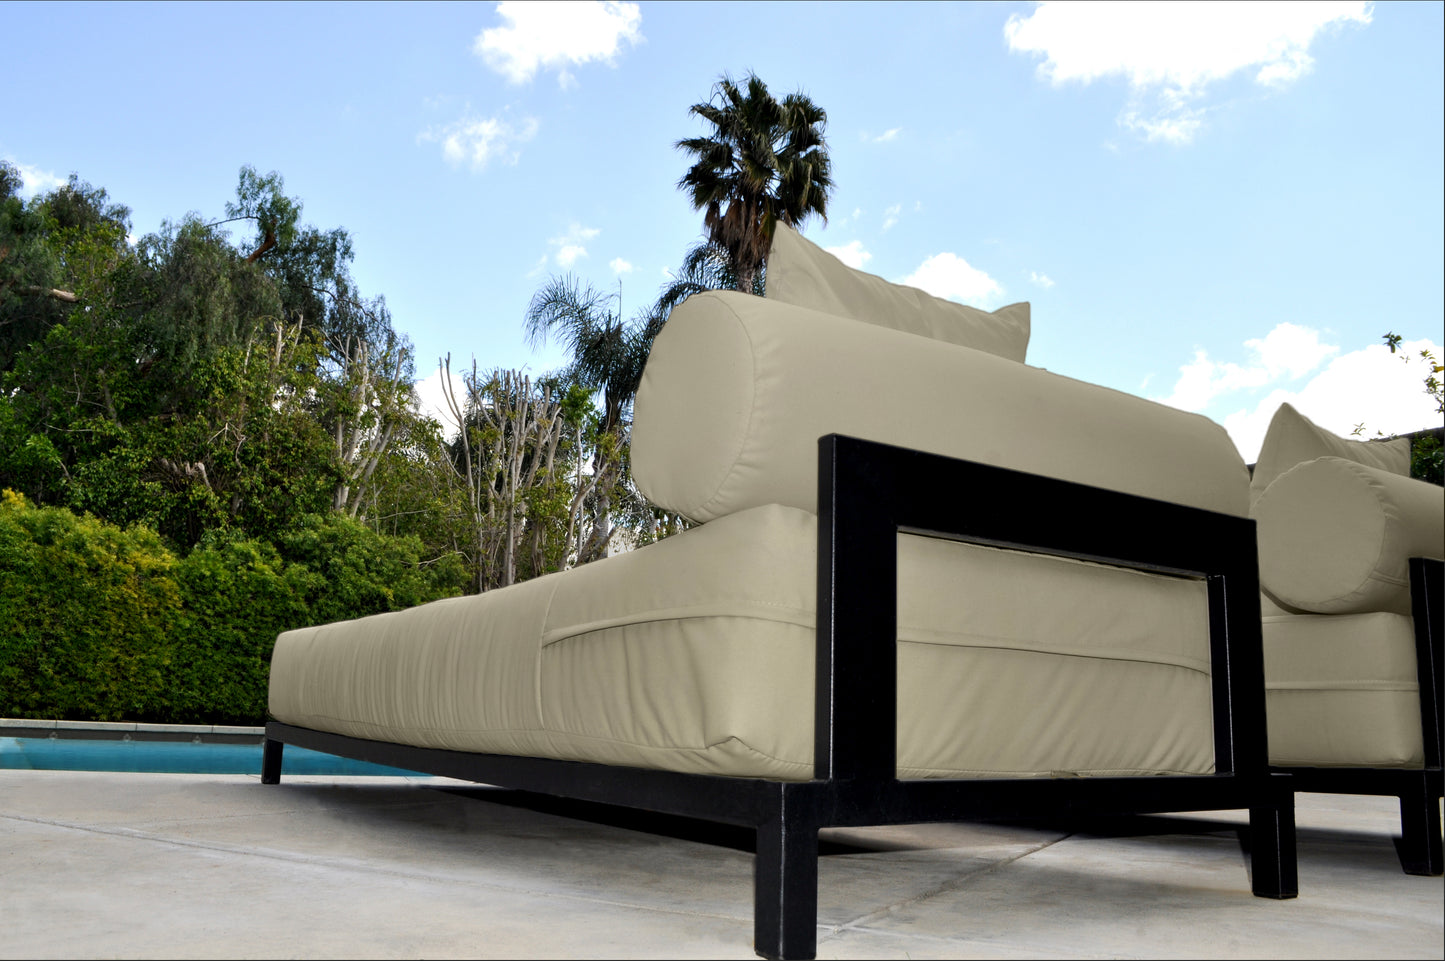 Volantes Outdoor Beige Chaise Lounger